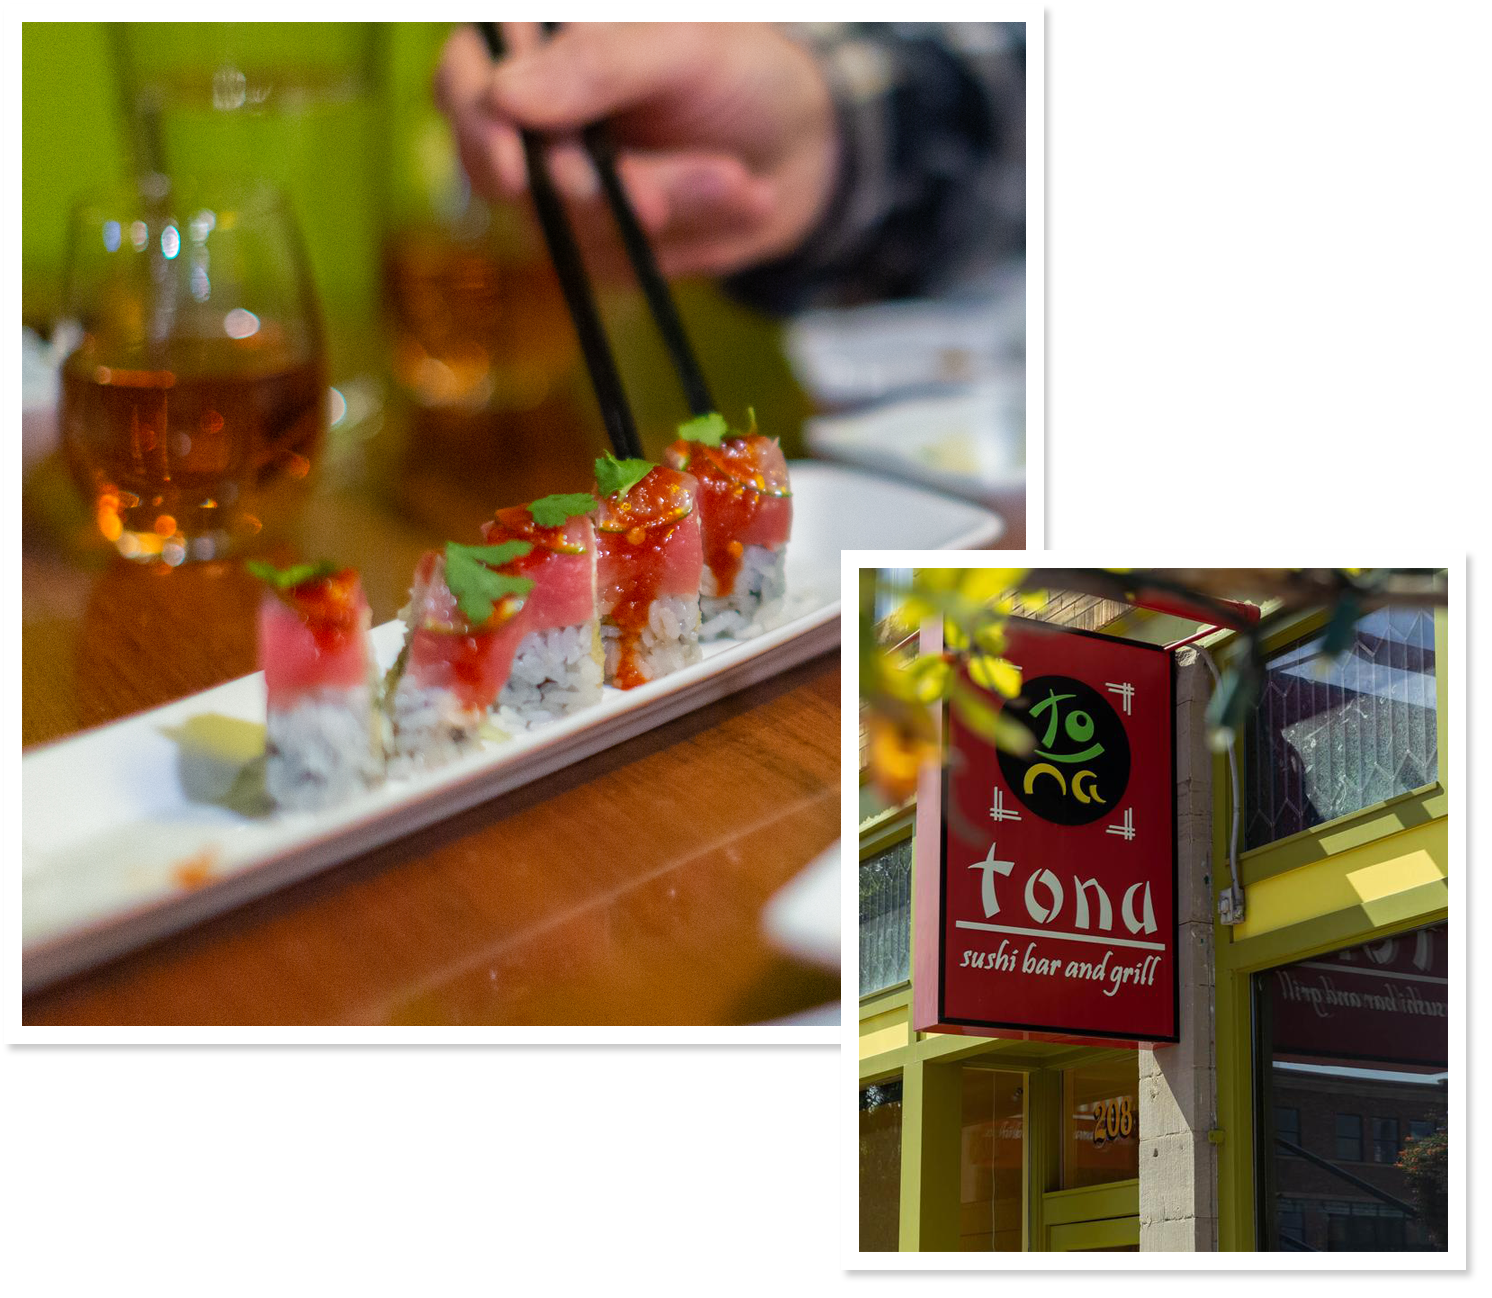 Some of the delicious food you'll taste on the OTown Food tour at Tona Sushi Bar and Grill